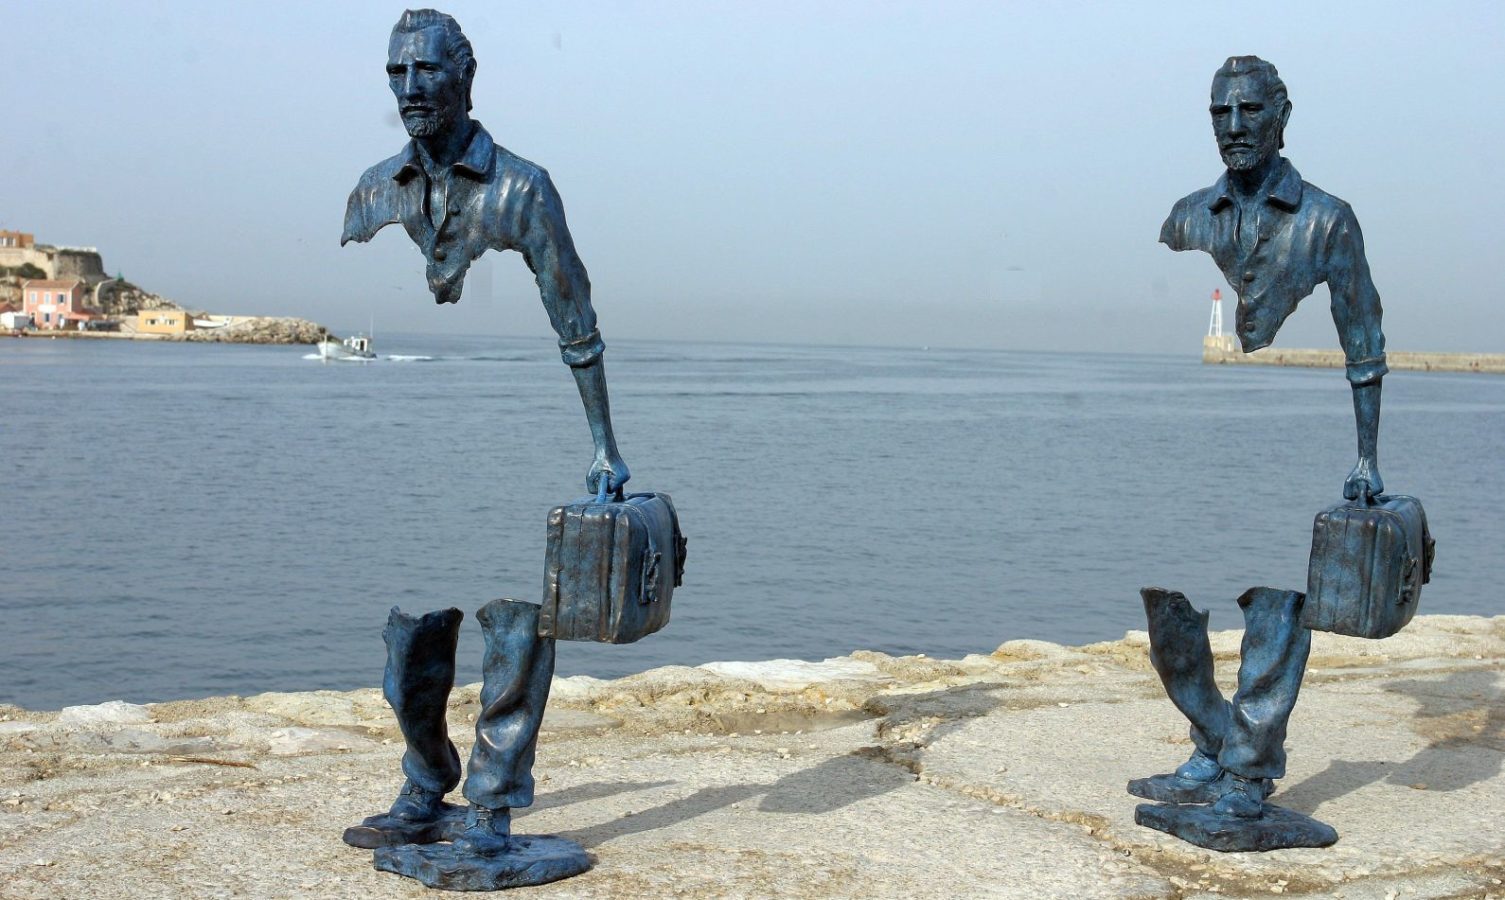 Not All There - The Enigmatic Sculptures of Bruno Catalano